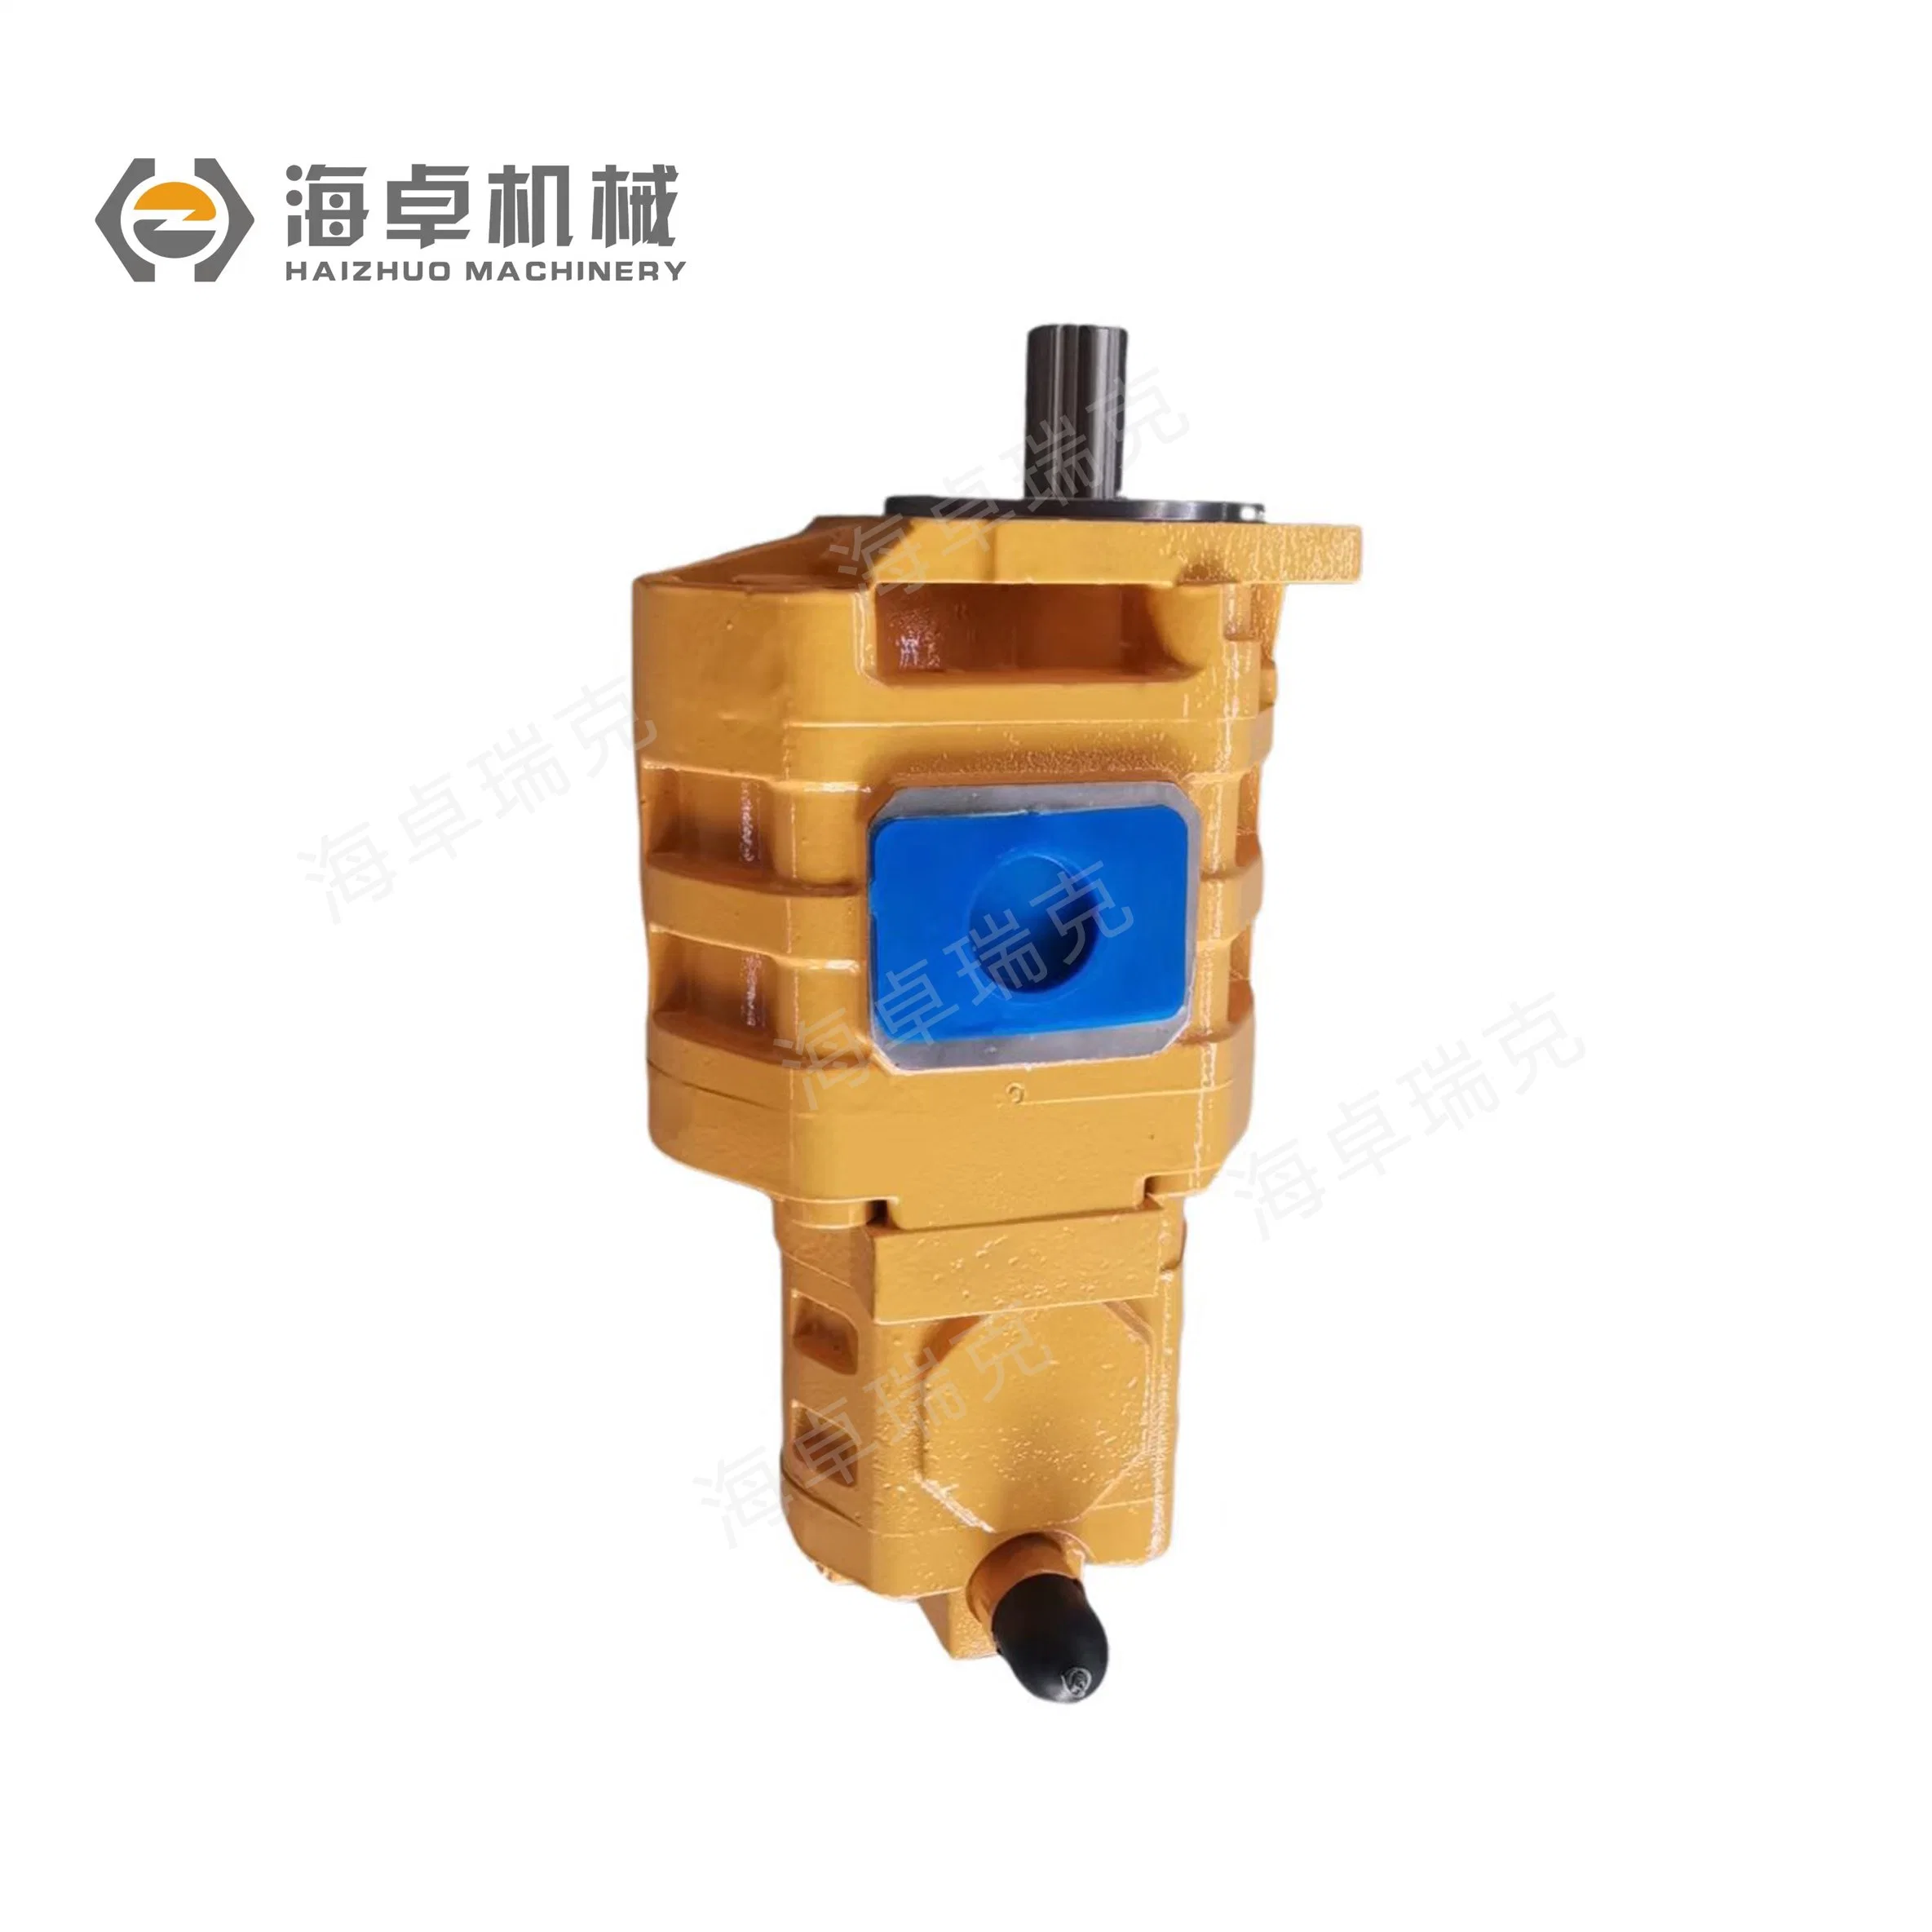 Cbgj3/1 Hydraulic Double Oil Gear Pump High Pressure Fixed Displacement of Working & Pilot System for Large Wheel Loader of Chinese Supplier